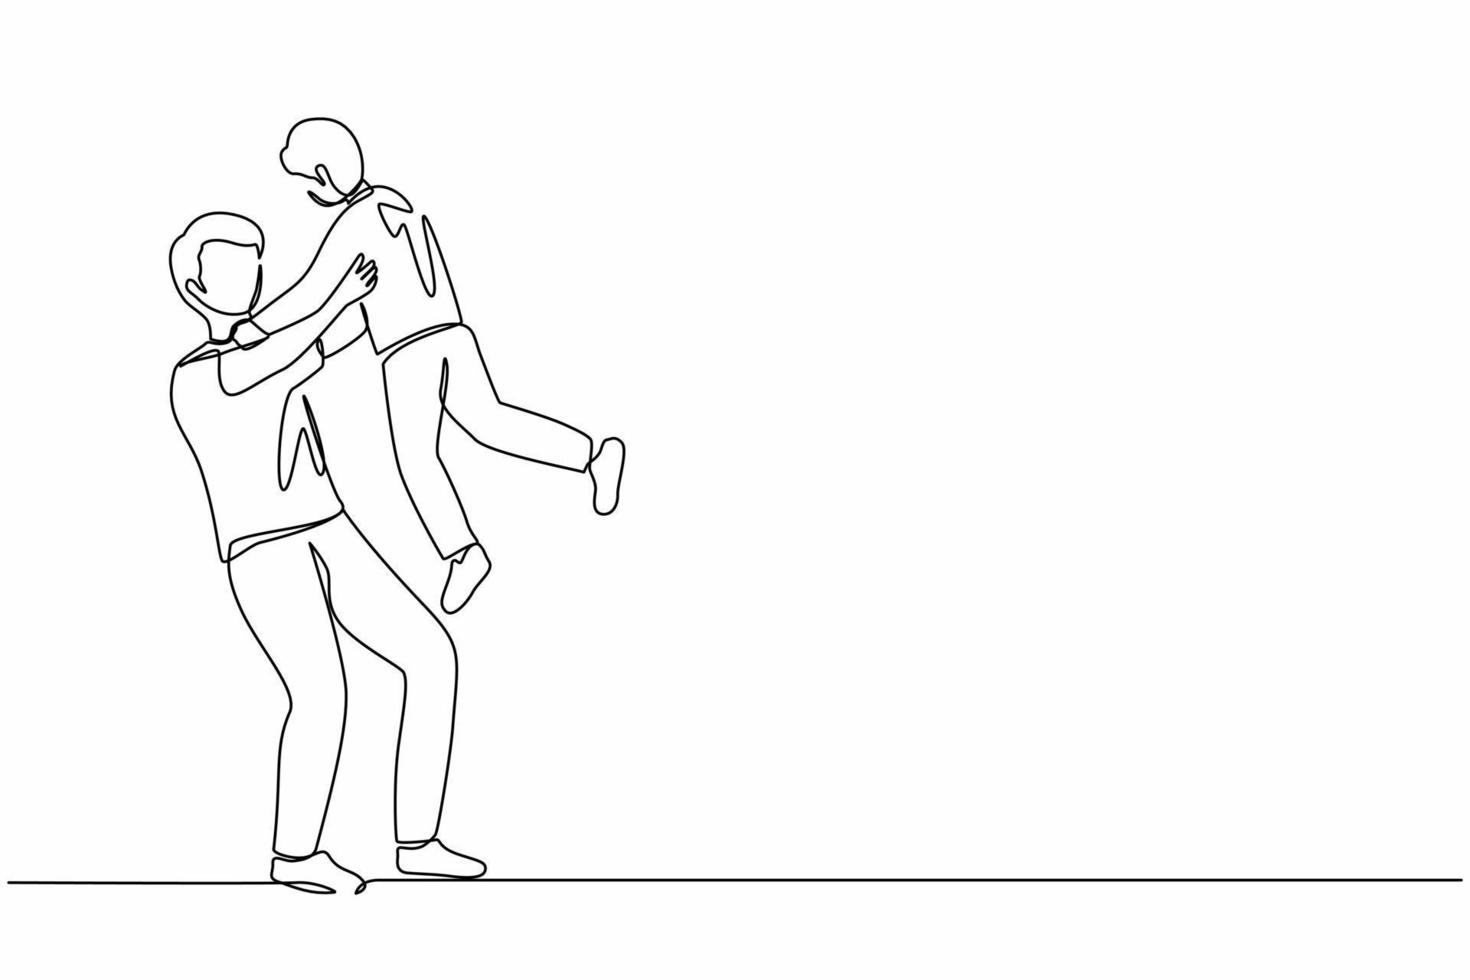 Single continuous line drawing happy father's day. Loving father carrying his little son on raised hands. Young family with dad and child playing together. One line graphic design vector illustration